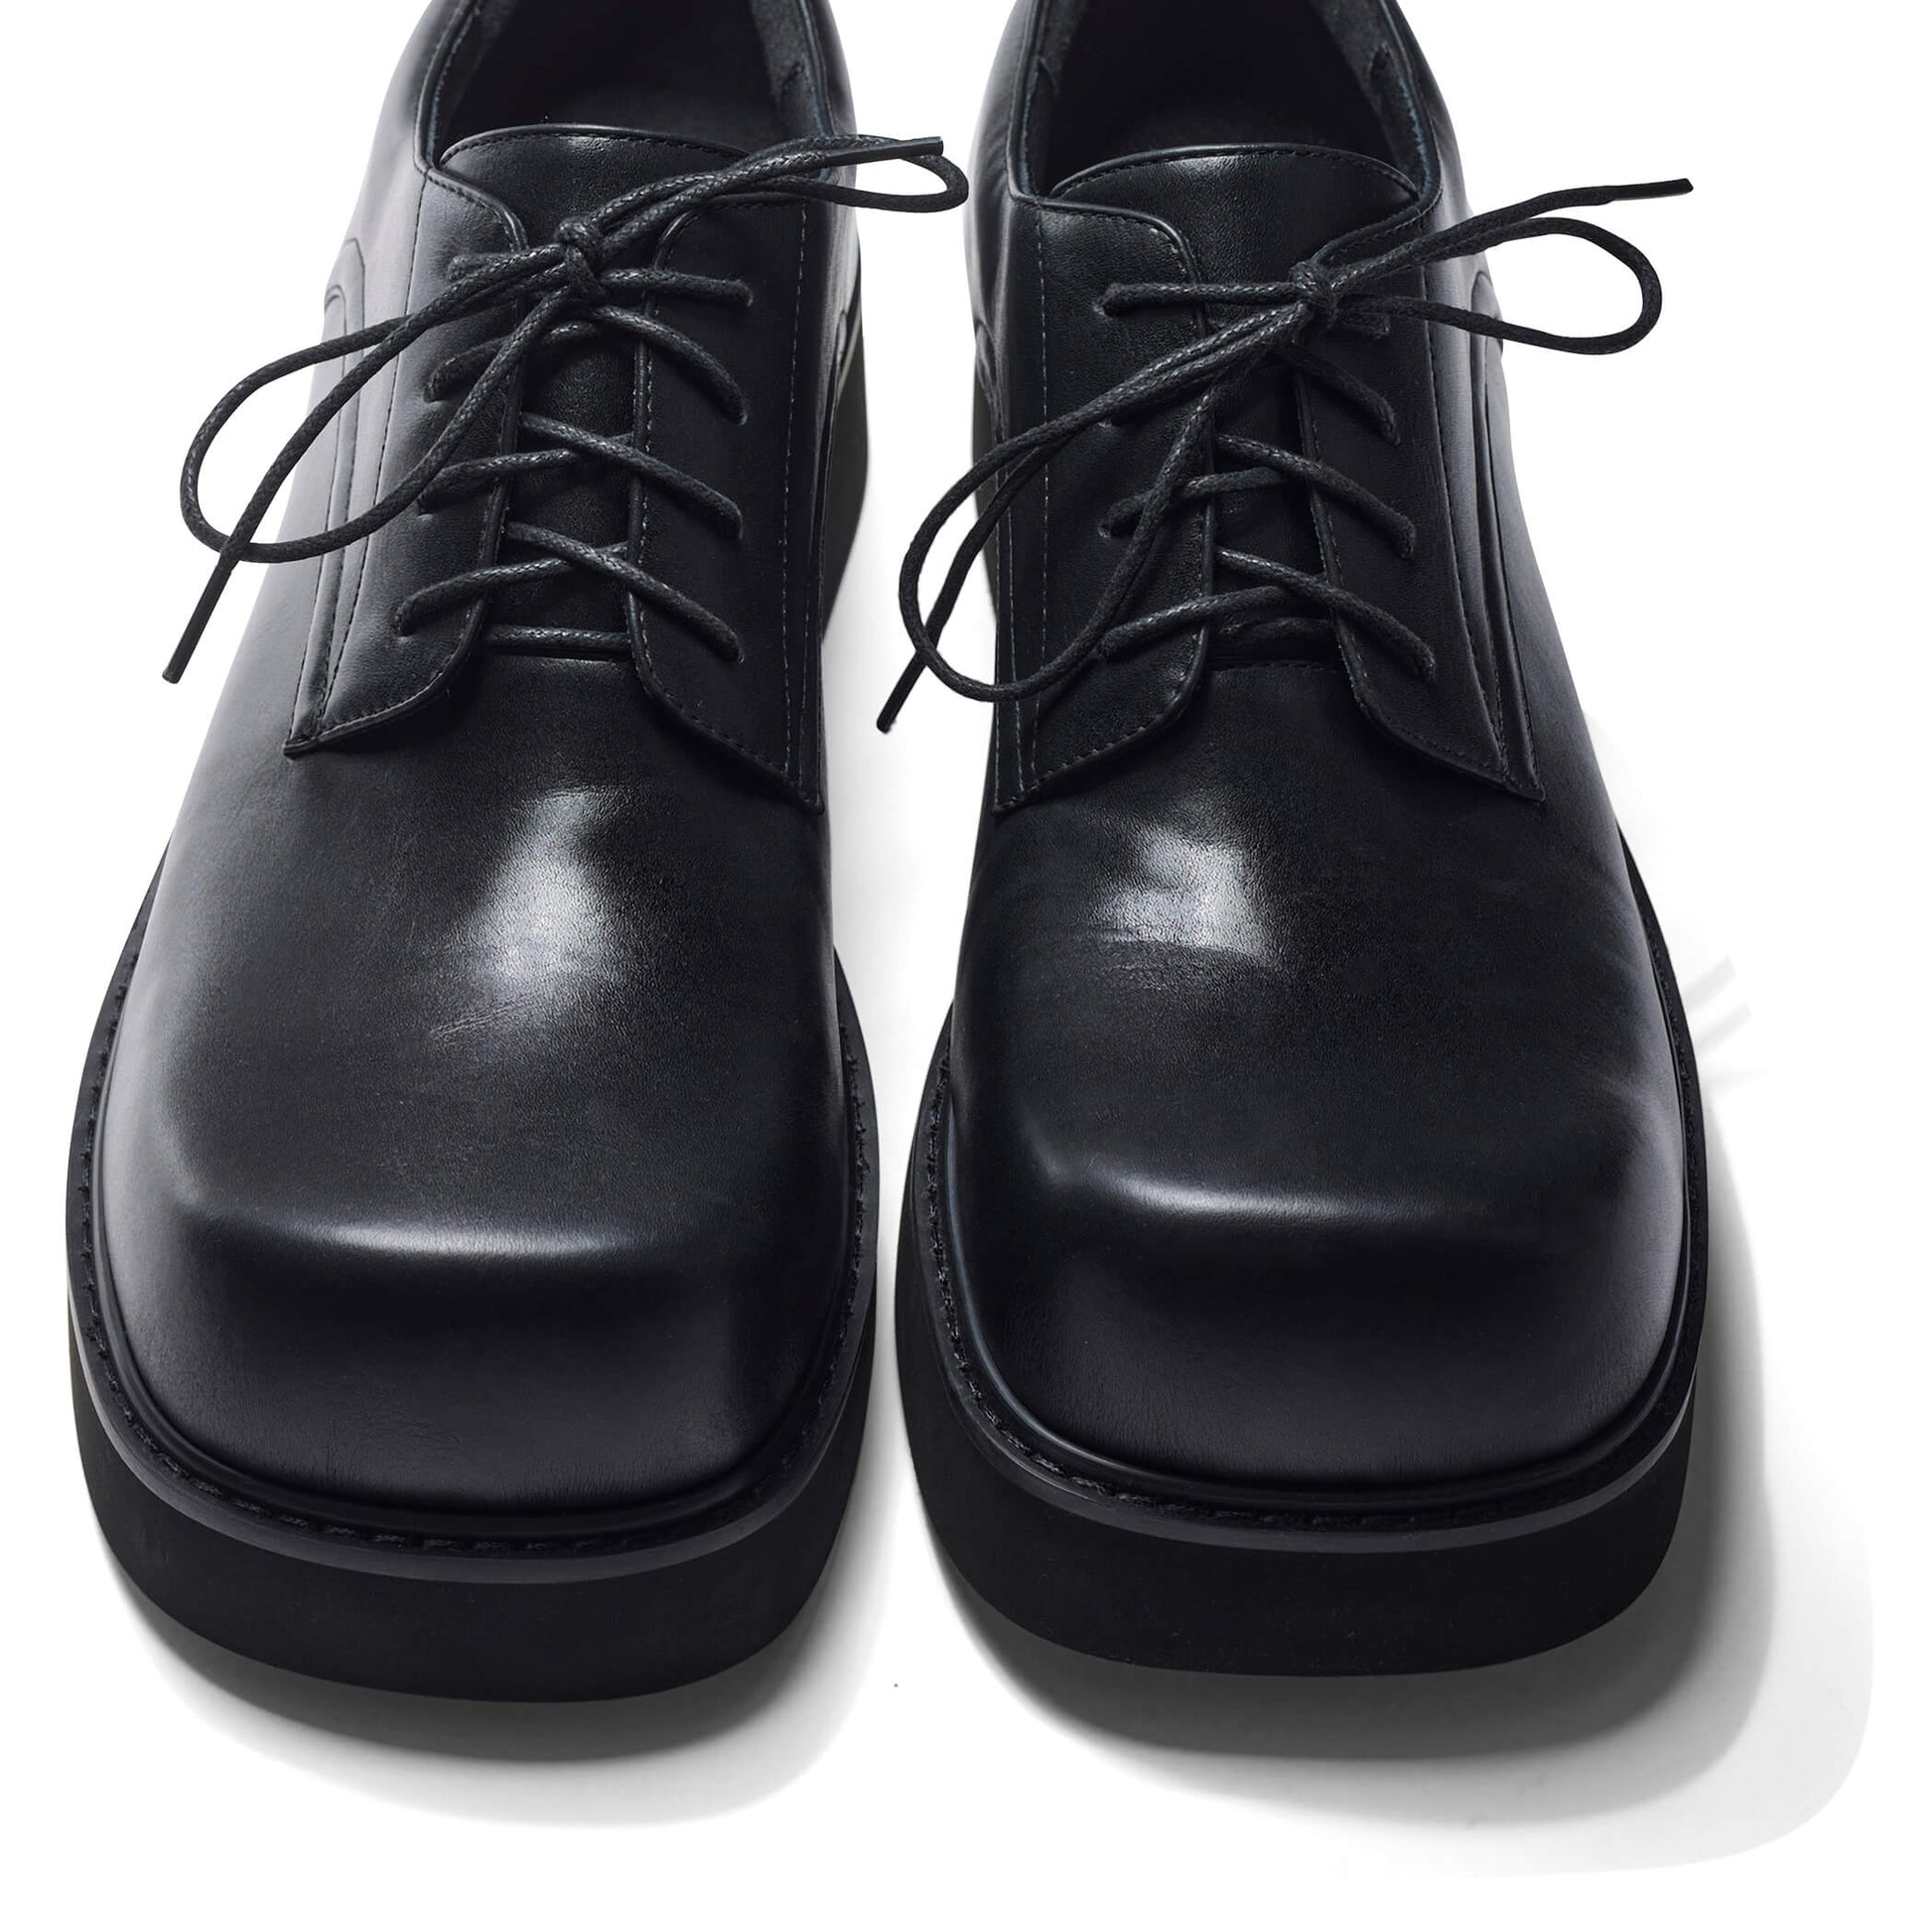 400% Oversized Derby Shoes - Black - Koi Footwear - Front View